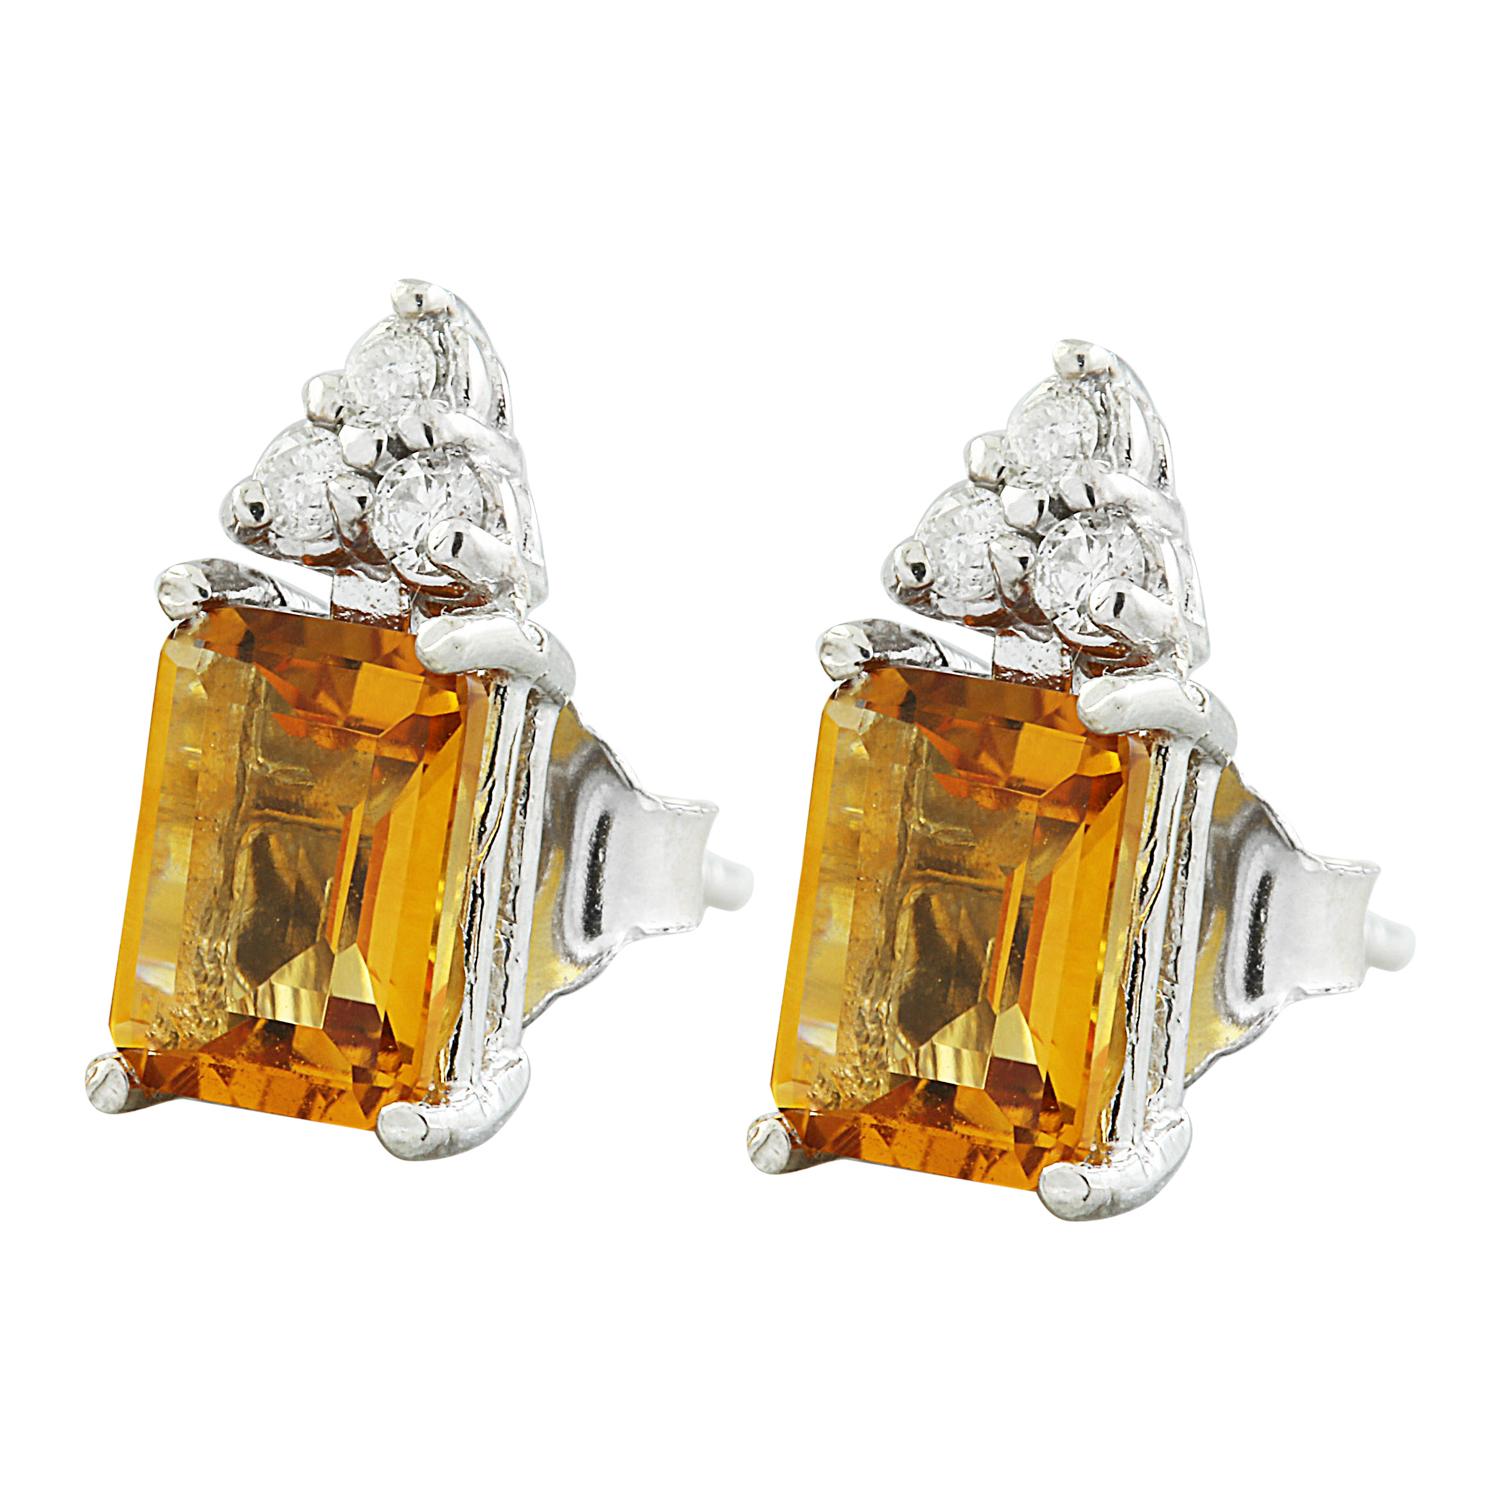 2.65 Carat Natural Citrine 14 Karat Solid White Gold Diamond Earrings
Stamped: 14K
Total Earrings Weight: 1.5 Grams 
Citrine Weight: 2.50 Carat (7.00x5.00 Millimeters)  
Diamond Weight: 0.15 Carat (F-G Color, VS2-SI1 Clarity )
Face Measures: